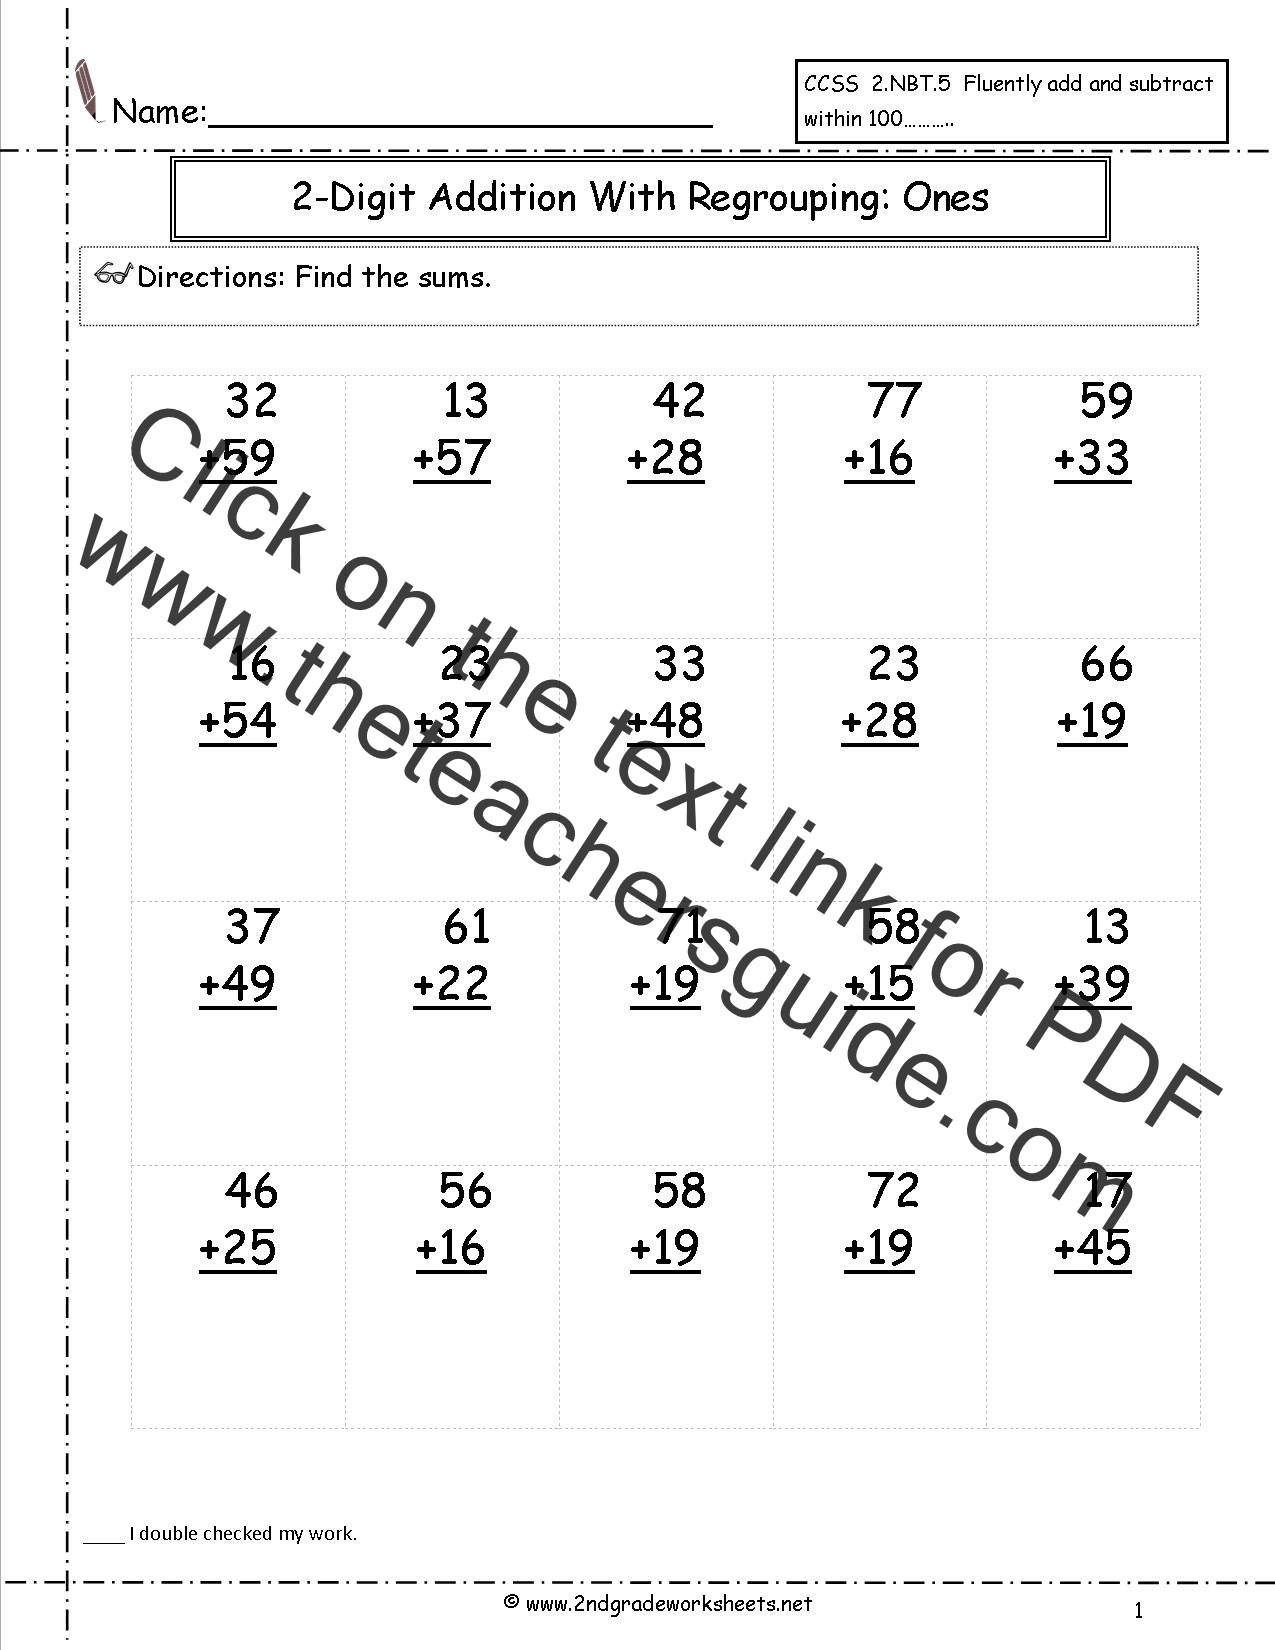 Adding Tens and Ones Two Digit Number Worksheet Adding tens and units without carrying worksheets